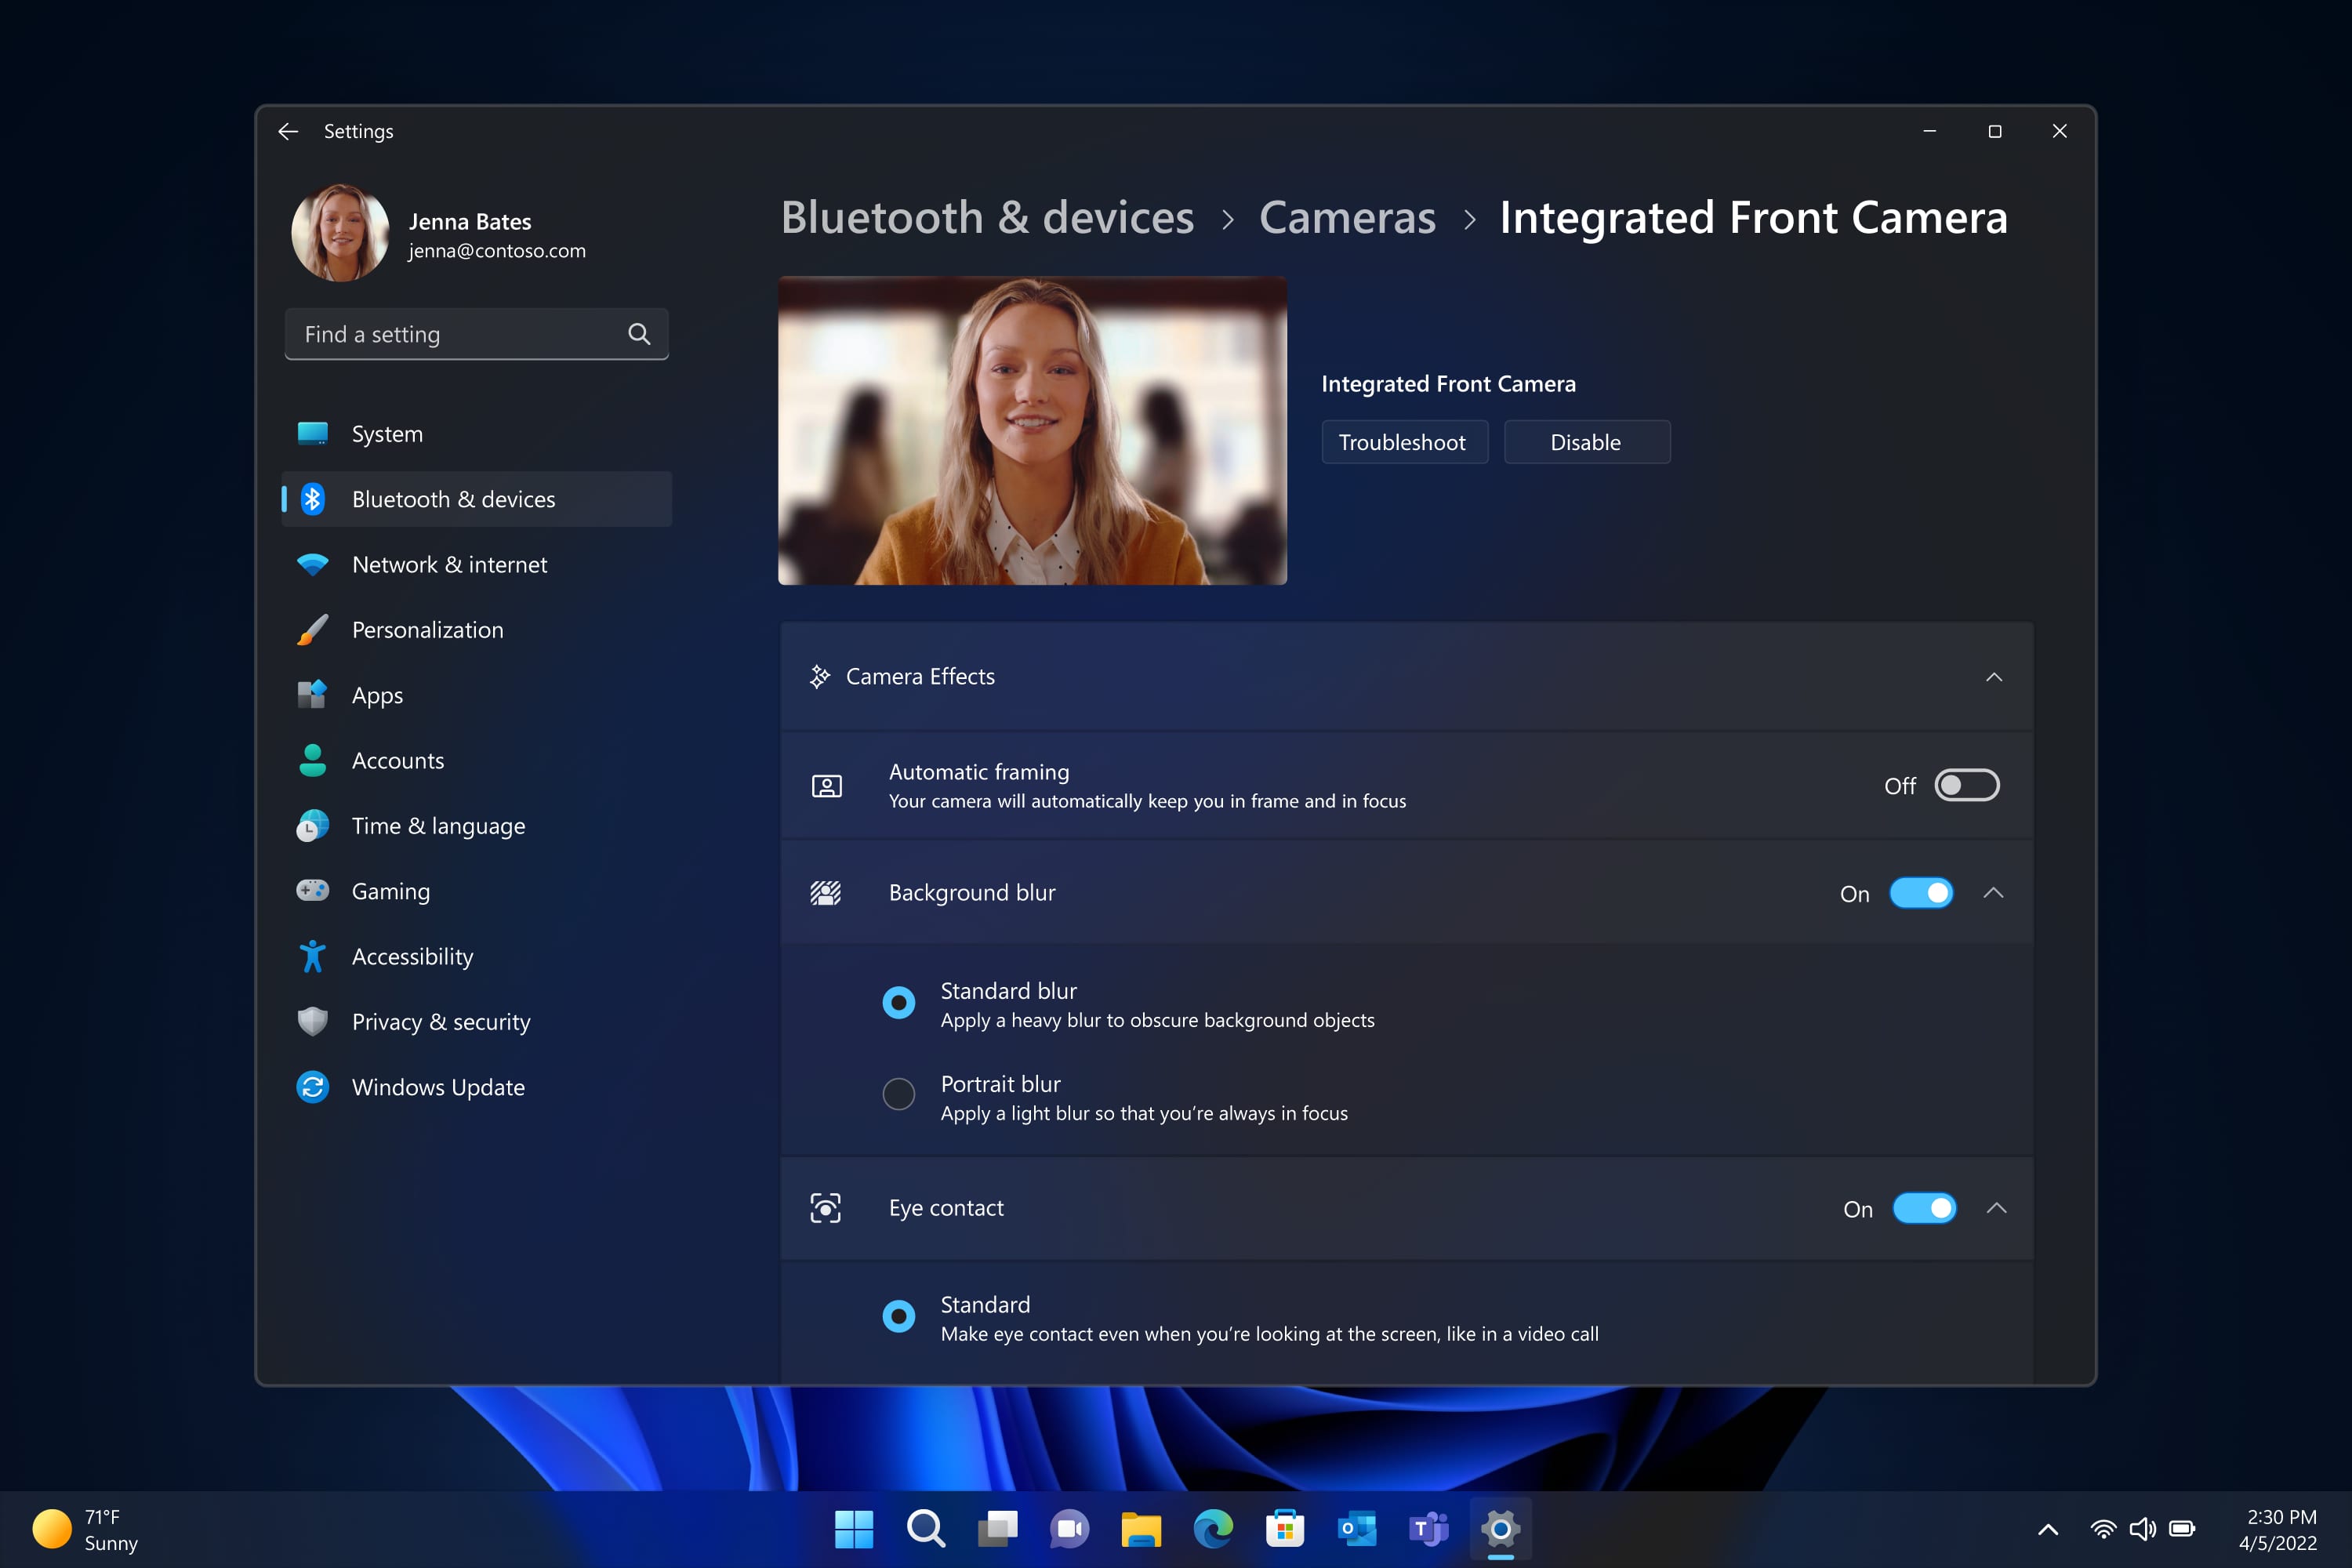 If you have a compatible PC, Windows 11 can make it look like you're always making eye contact on video calls.